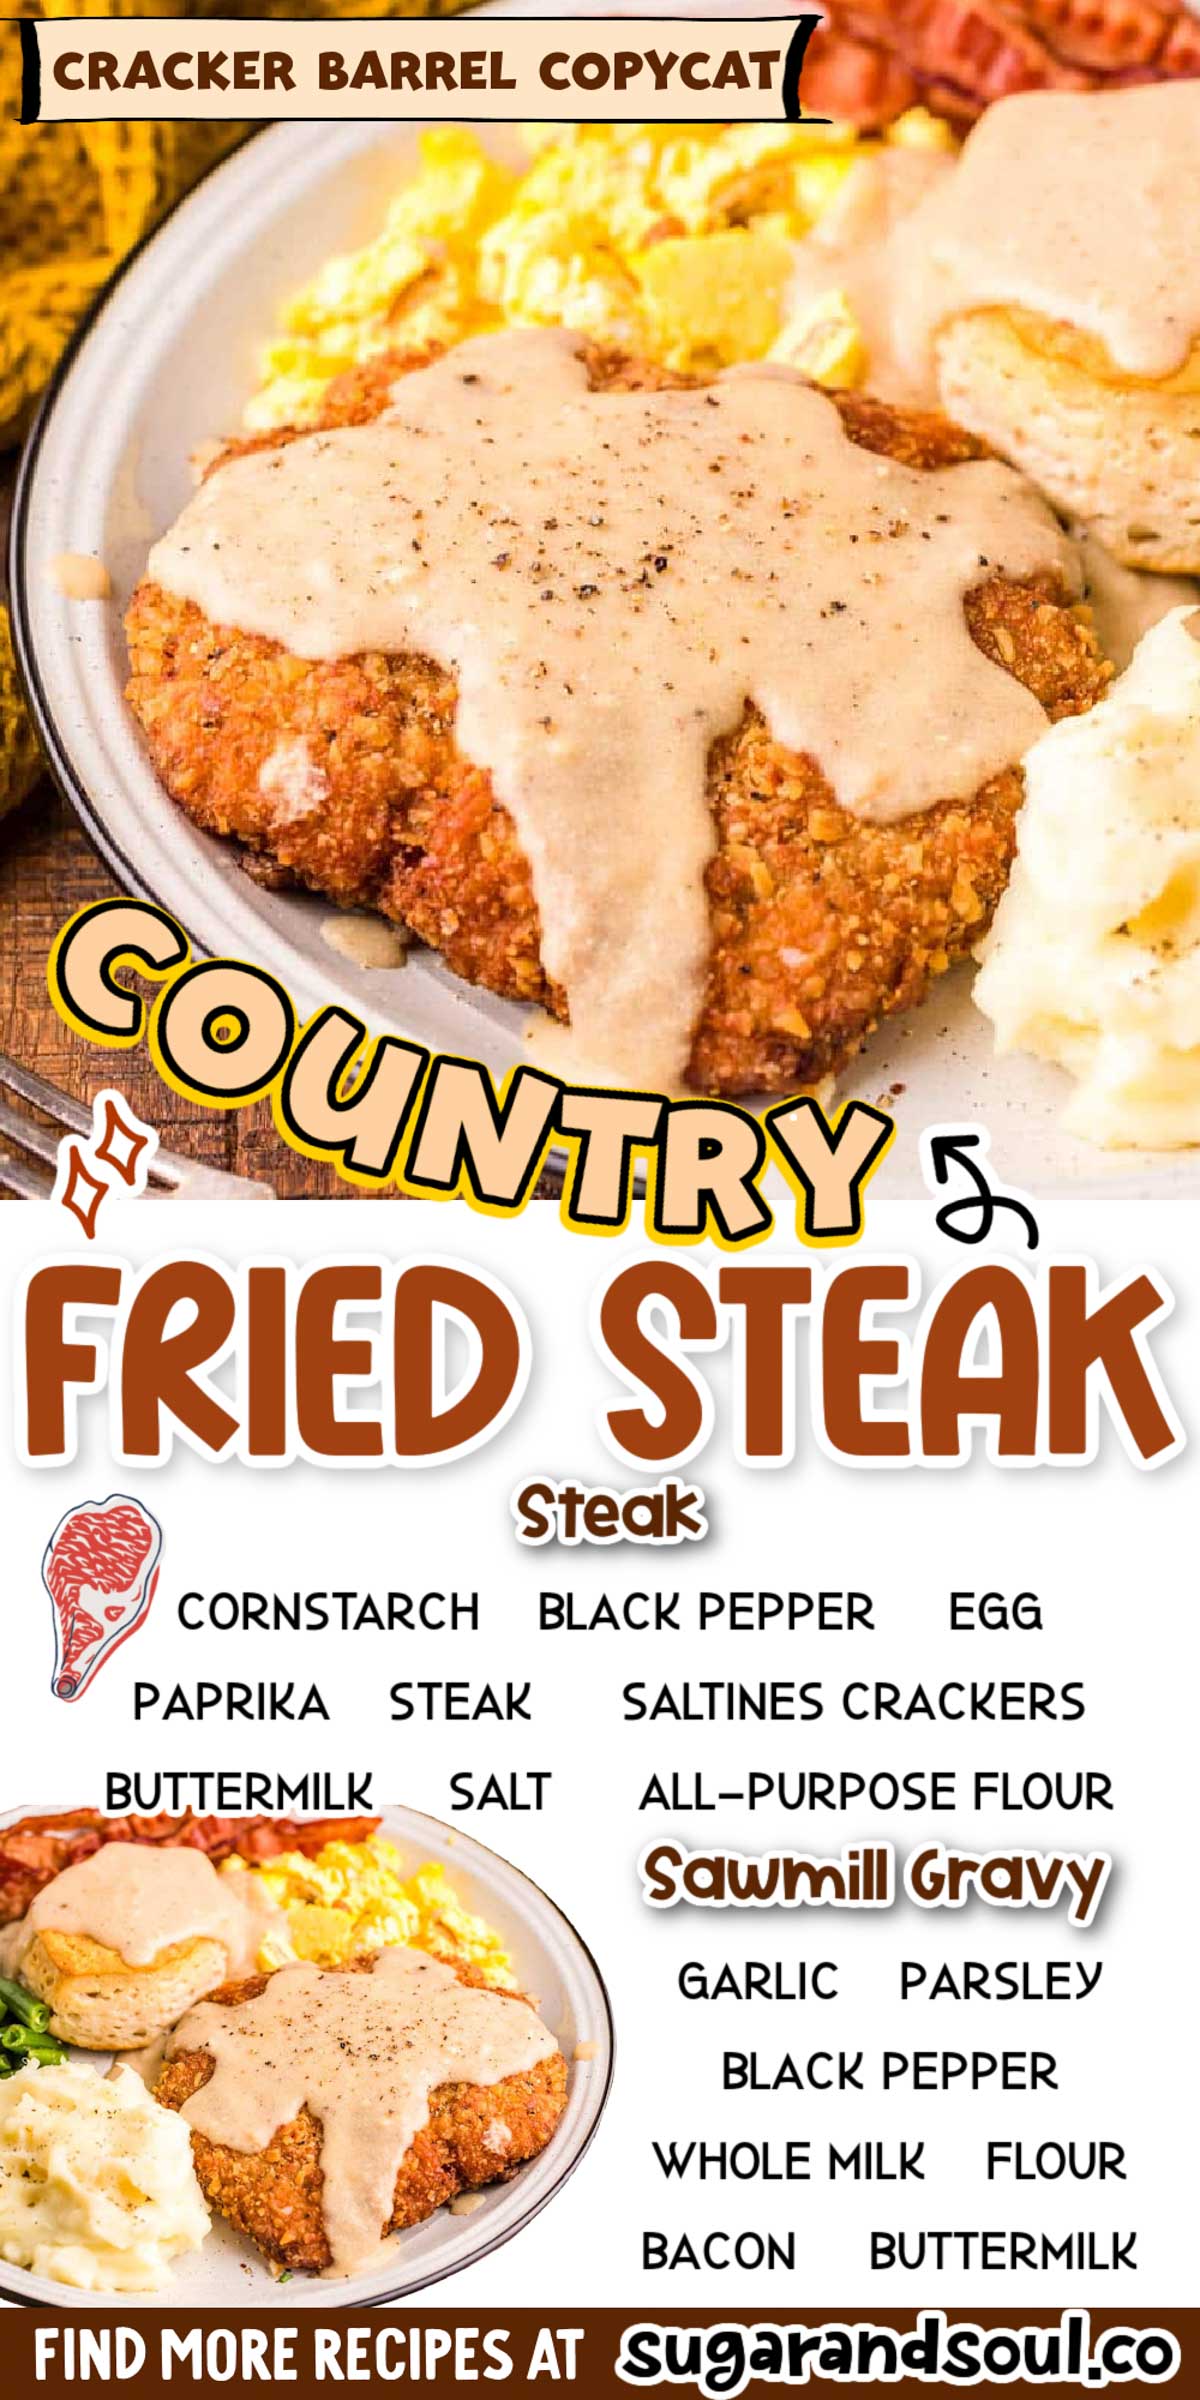 Country Fried Steak is a mouthwatering Cracker Barrel Copycat recipe that's topped with a homemade version of their creamy sawmill gravy! Slide this delicious steak onto the table for breakfast OR dinner in just one hour! via @sugarandsoulco